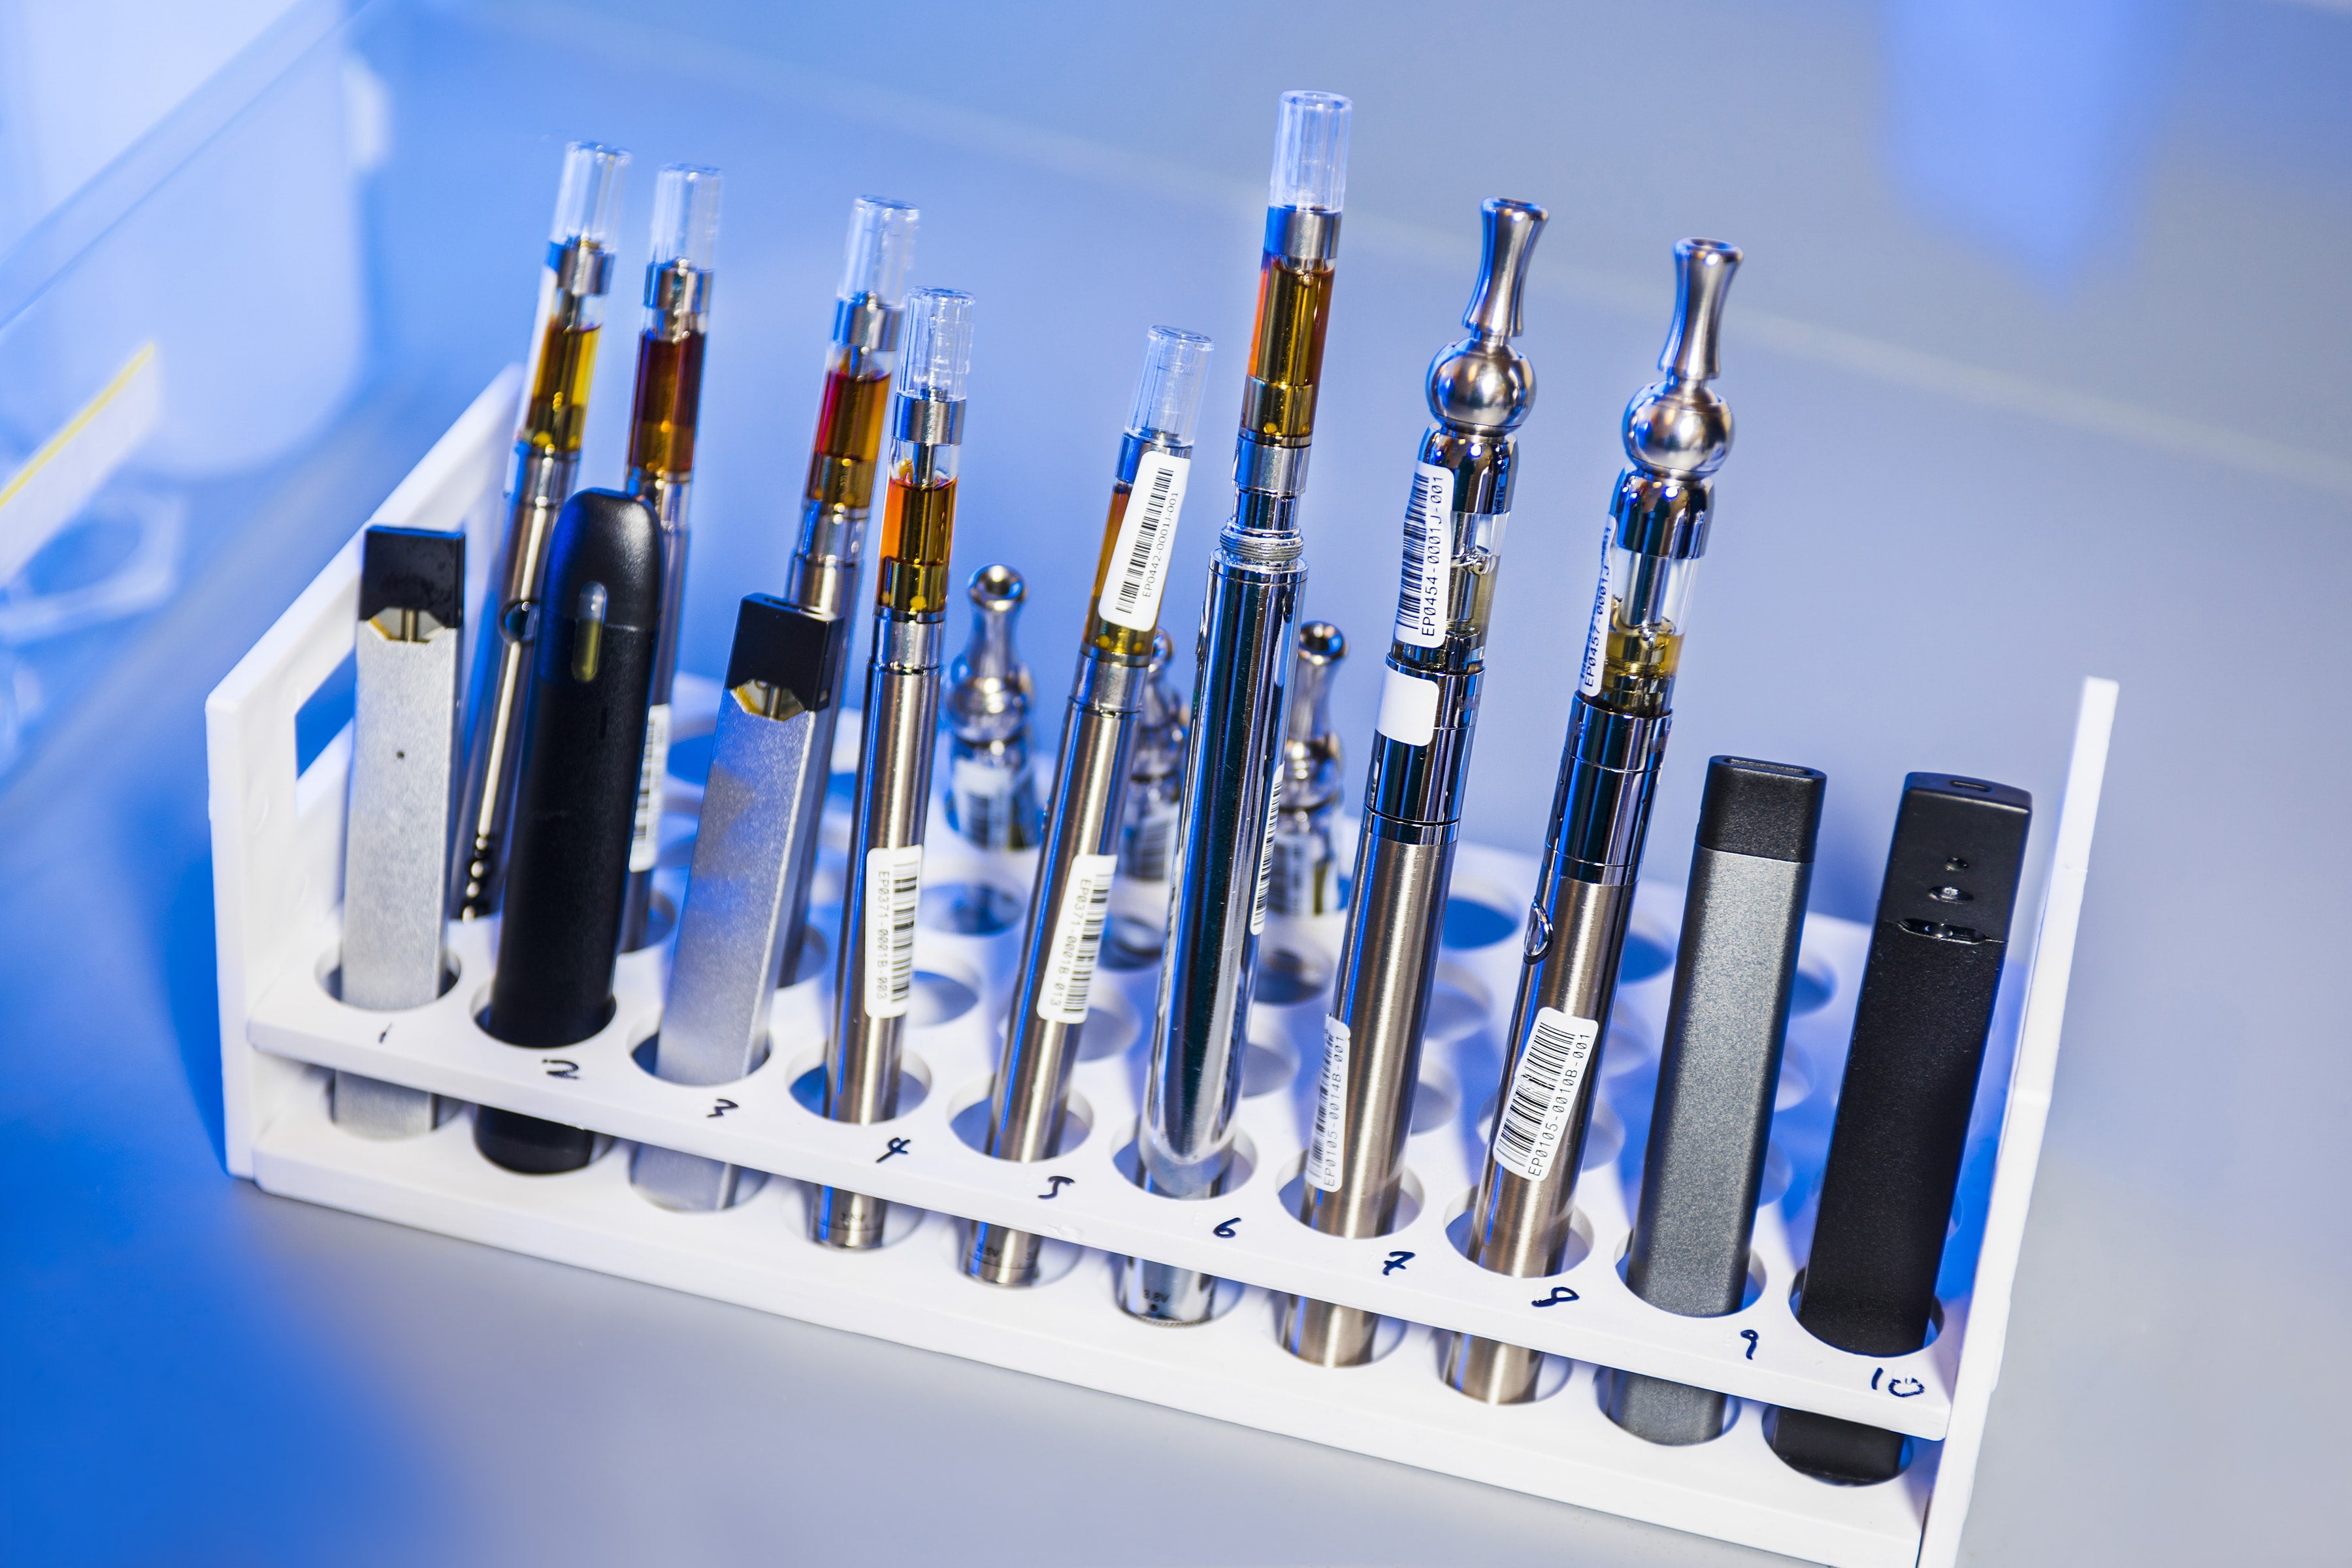 Weed pen batteries of different sizes with cartridges and pods stand on a rack for display.